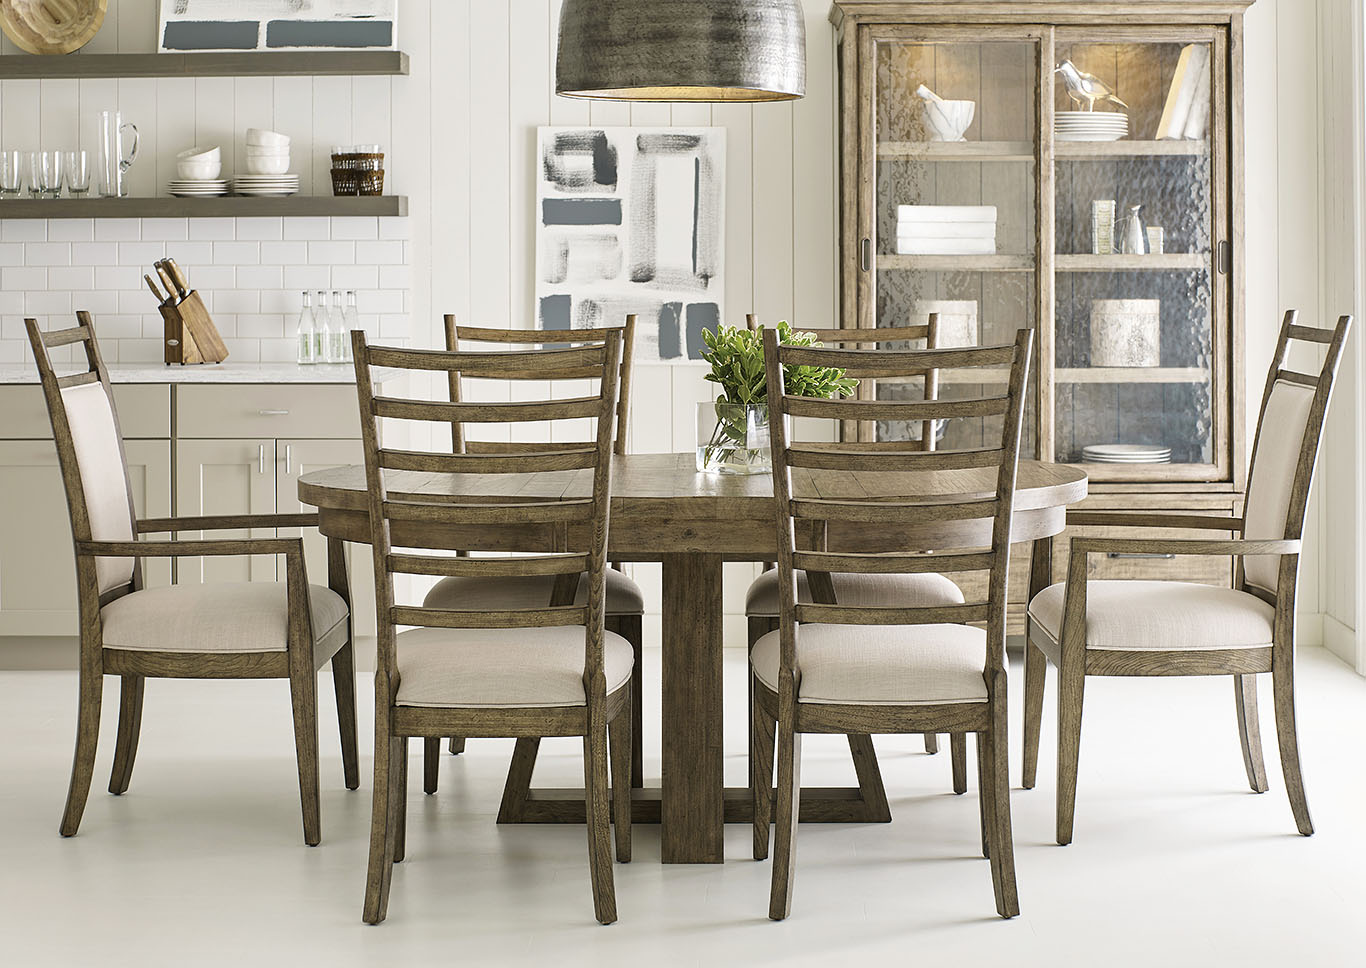 Plank Road Stone Oval Dining Set w/4 Side Chairs & 2 Arm Chairs,Kincaid